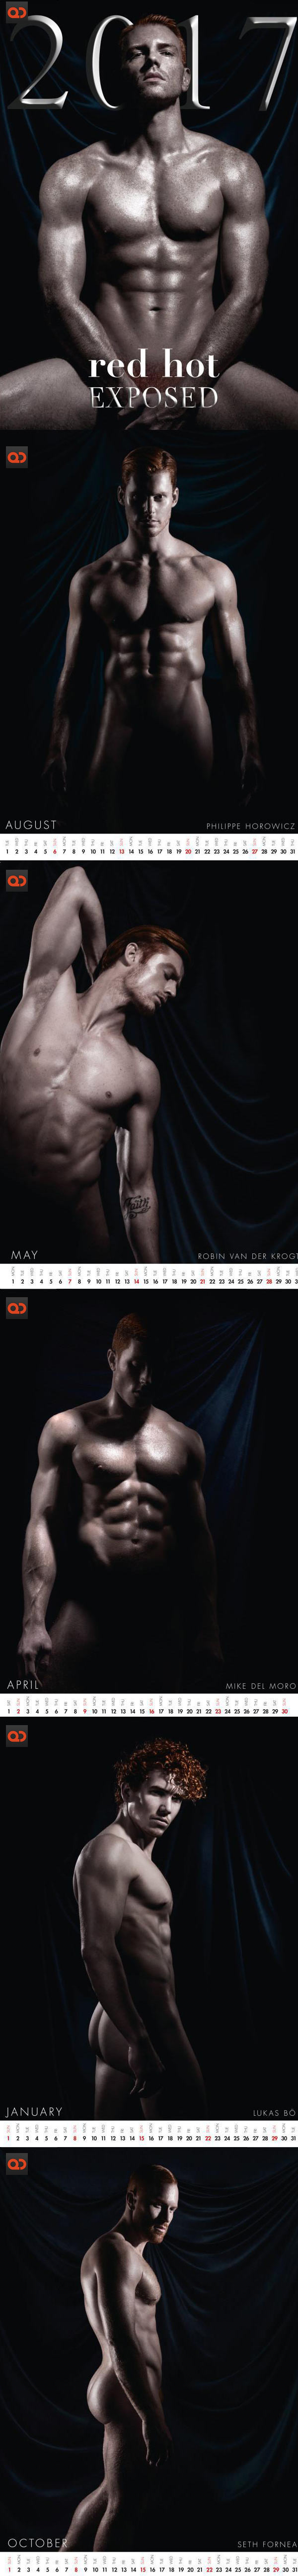 The Naked Gingers In The “Red Hot 2” 2017 Calendar Will Set Your Screen On Fire!